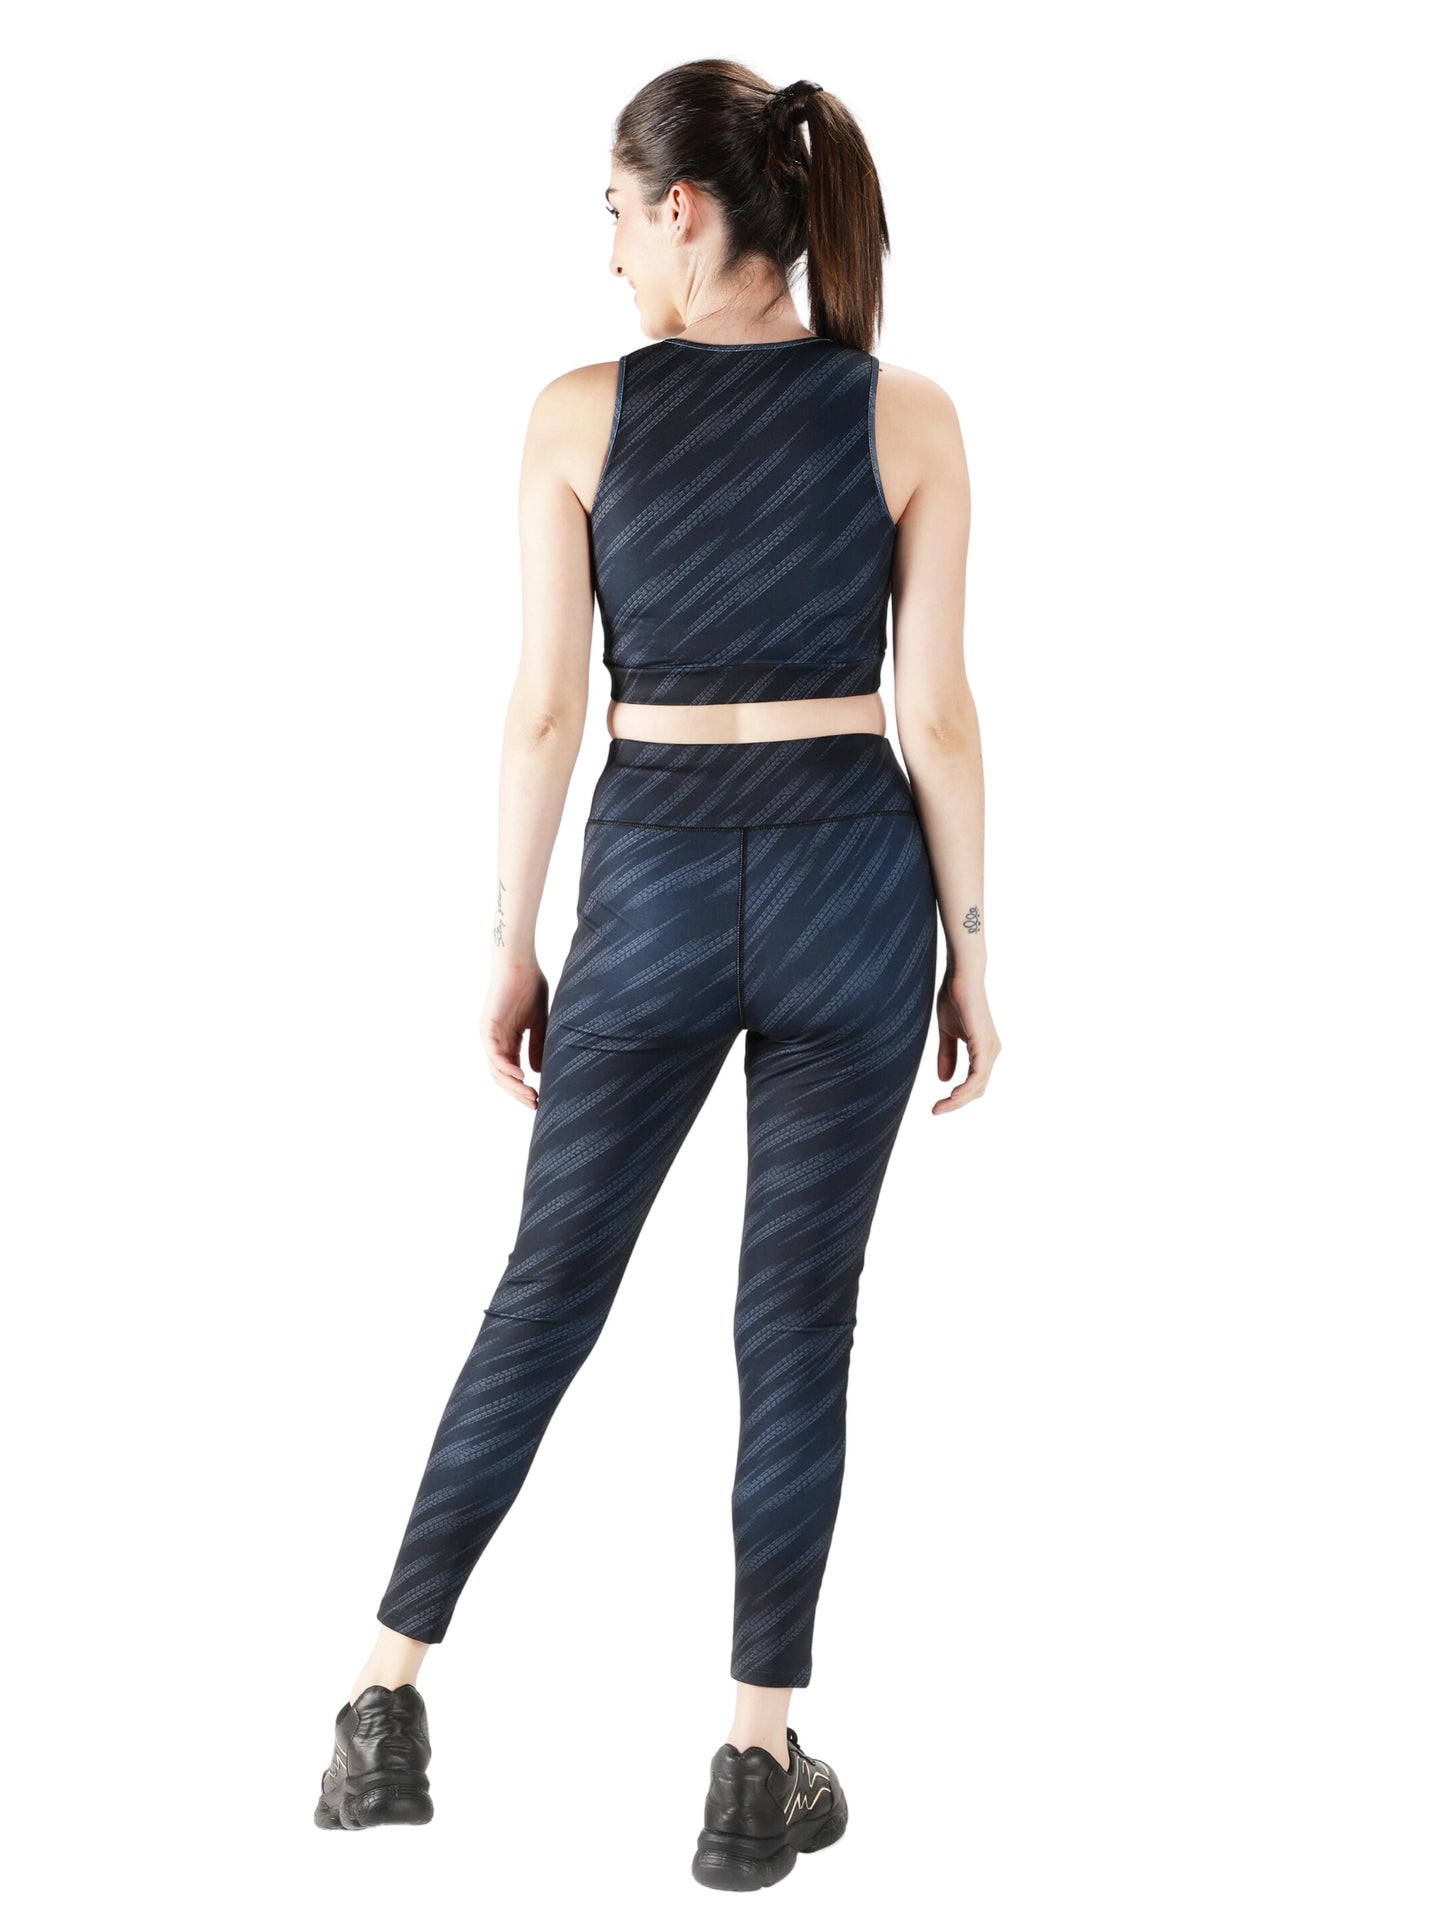 NUEVOSDAMAS Women Active WearTracksuit | Gym Wear Padded Top And Bottom Set | Dry Fit Women Active Wear Combo Set_Blue